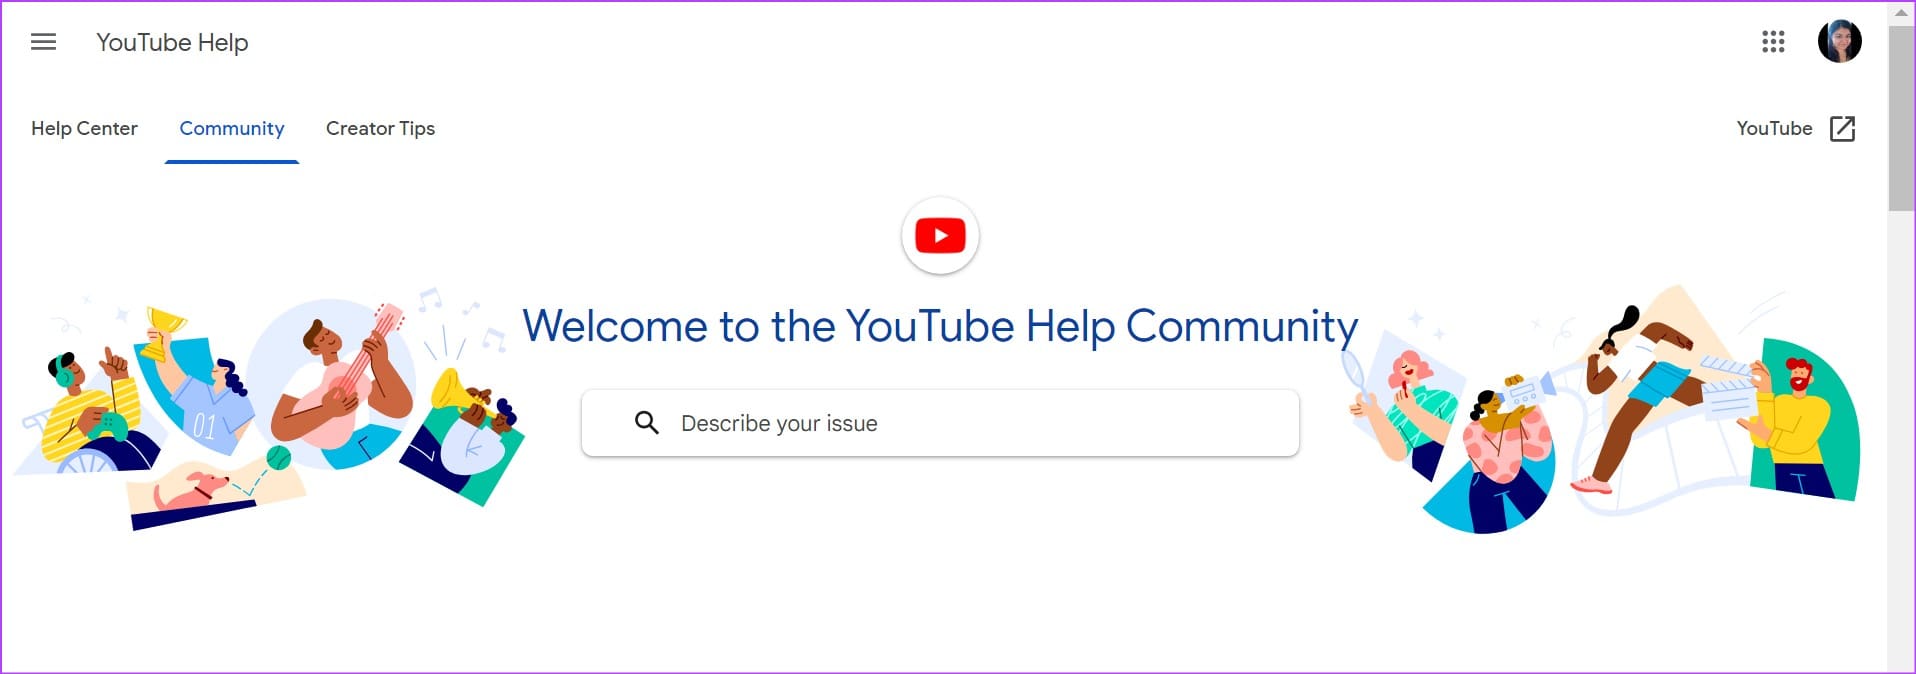 Contact YouTube Support